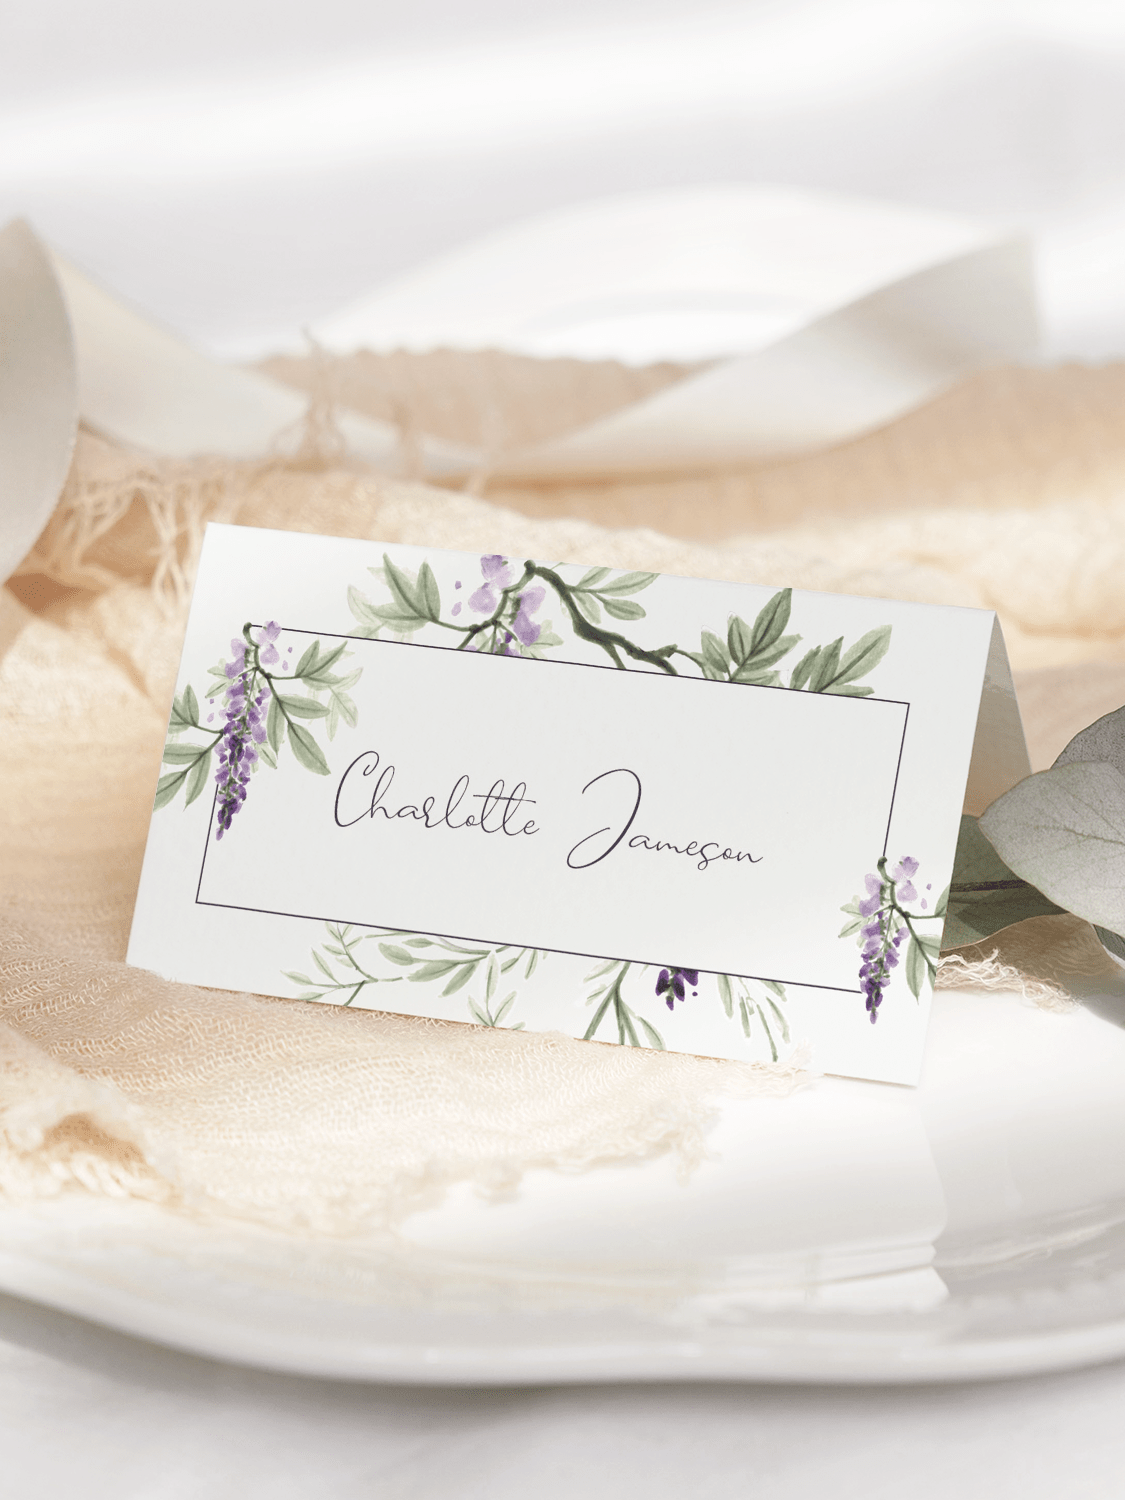 Wisteria Falls wedding place card in Morning Light, front view